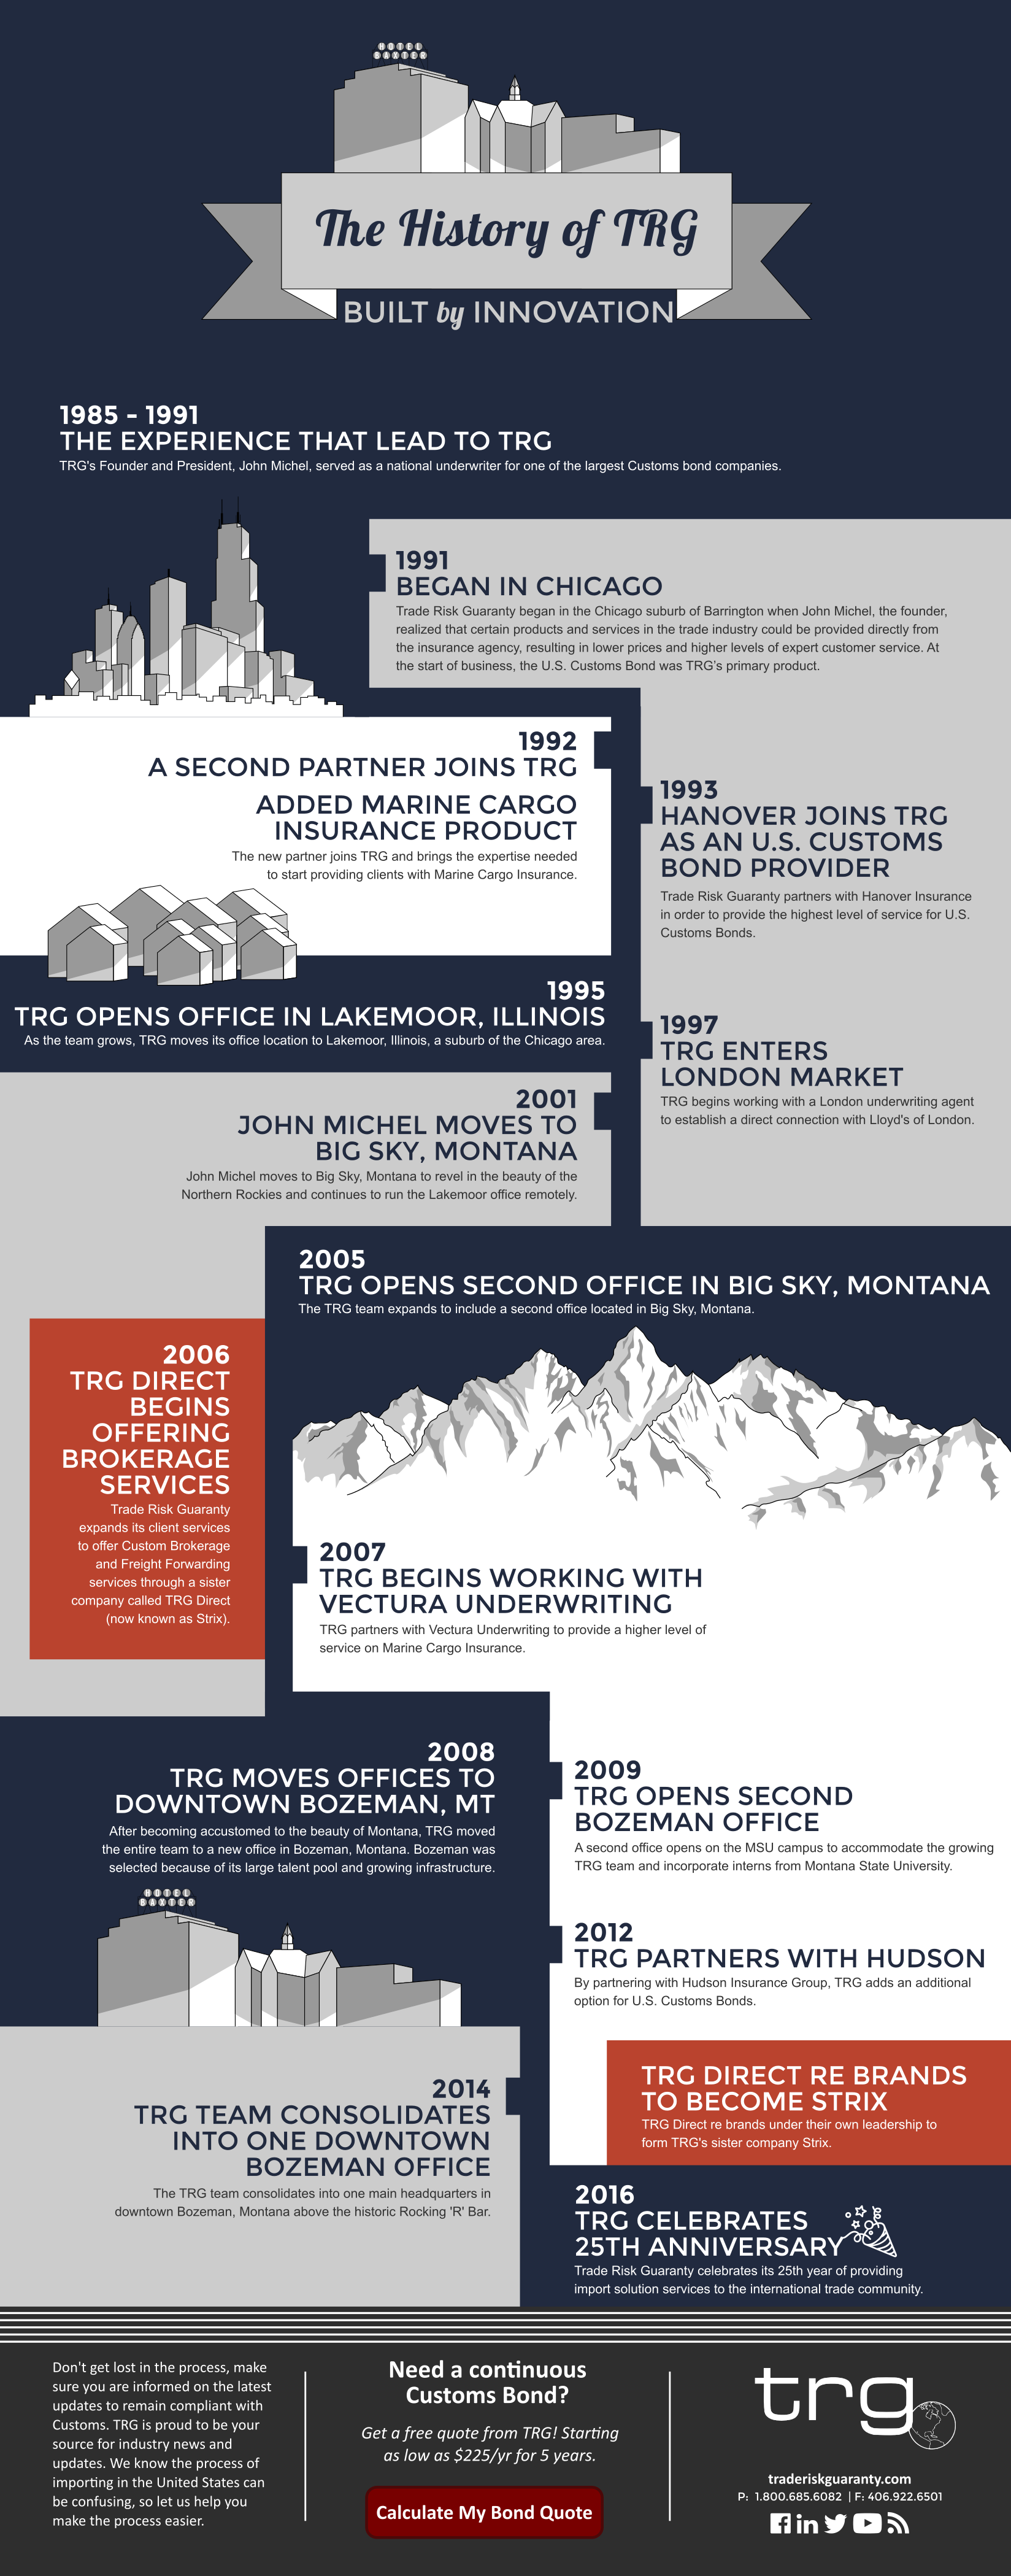 Discover the history of TRG in this infographic of the timeline.